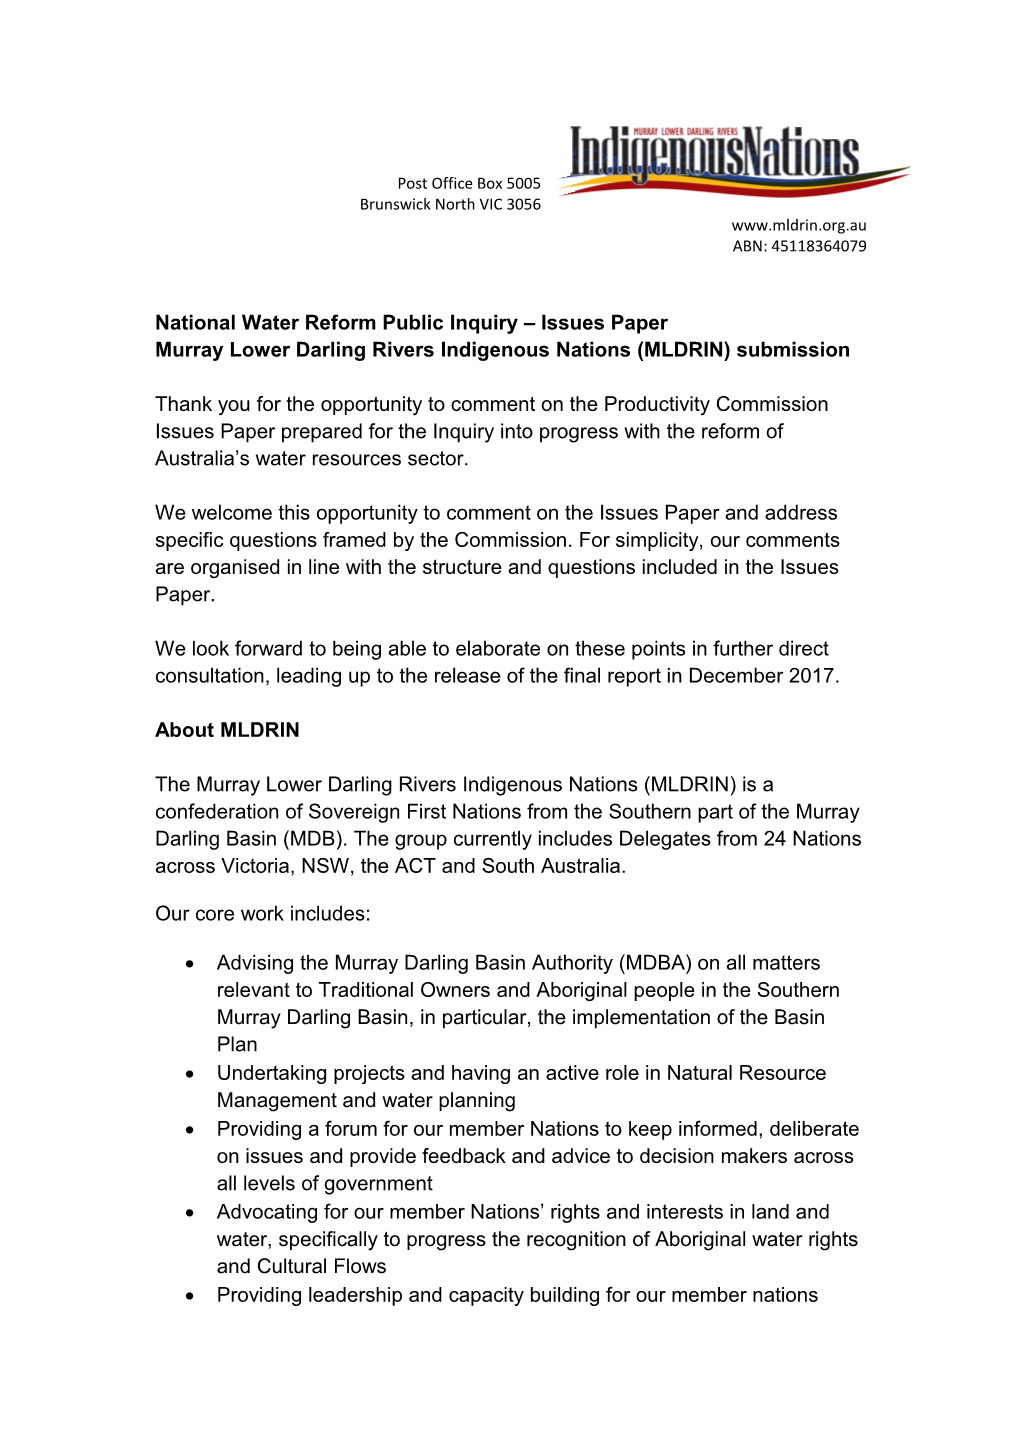 Submission 60 - Murray Lower Darling Rivers Indigenous Nations (MLDRIN) - National Water